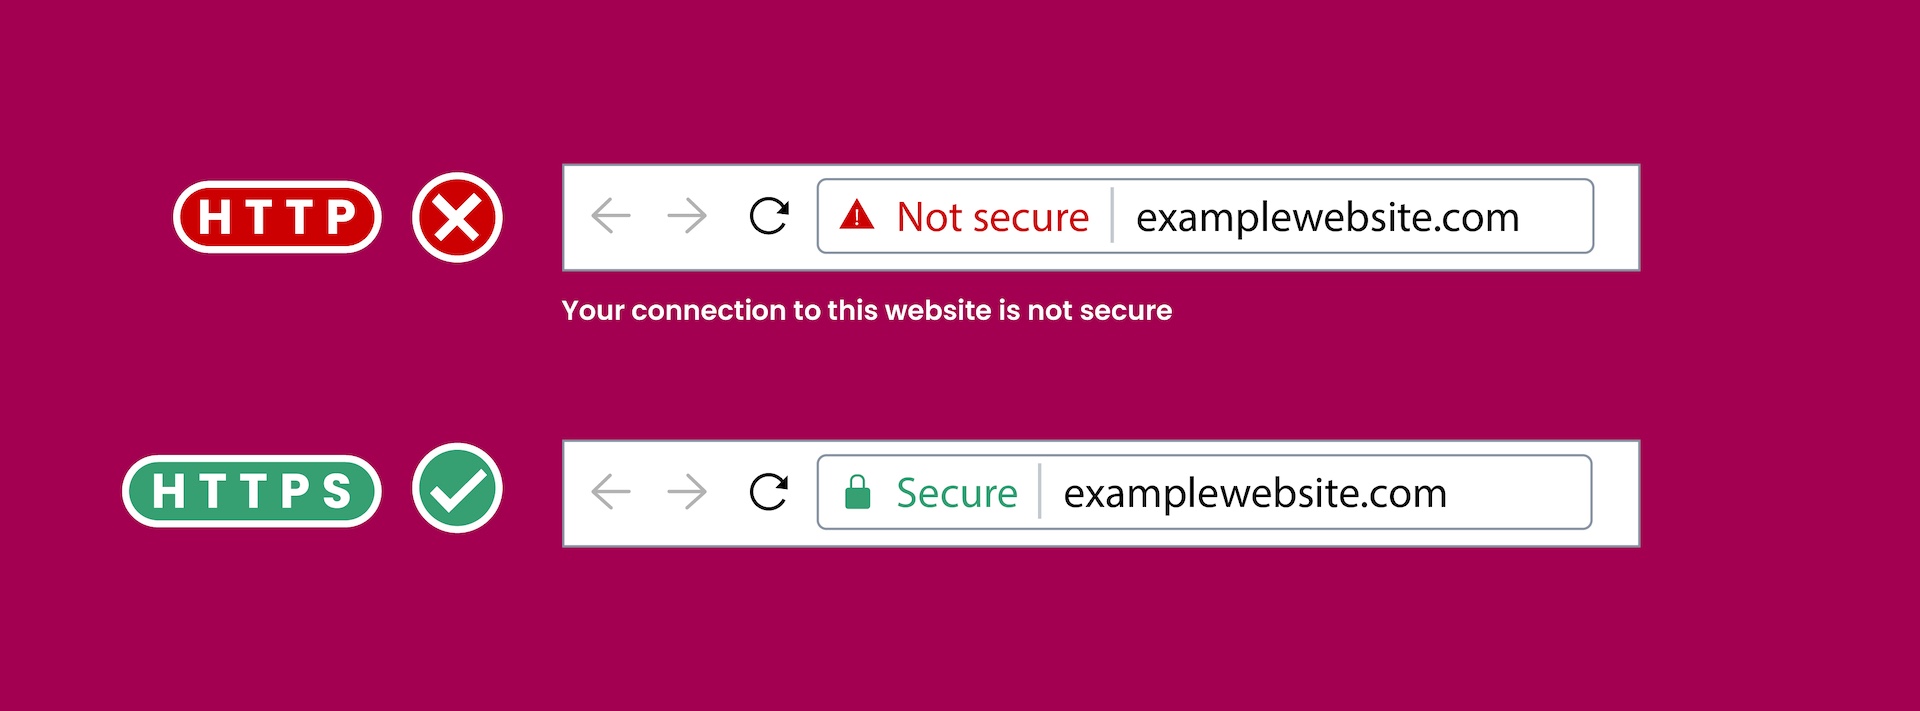 Why HTTPS over HTTP - Explained